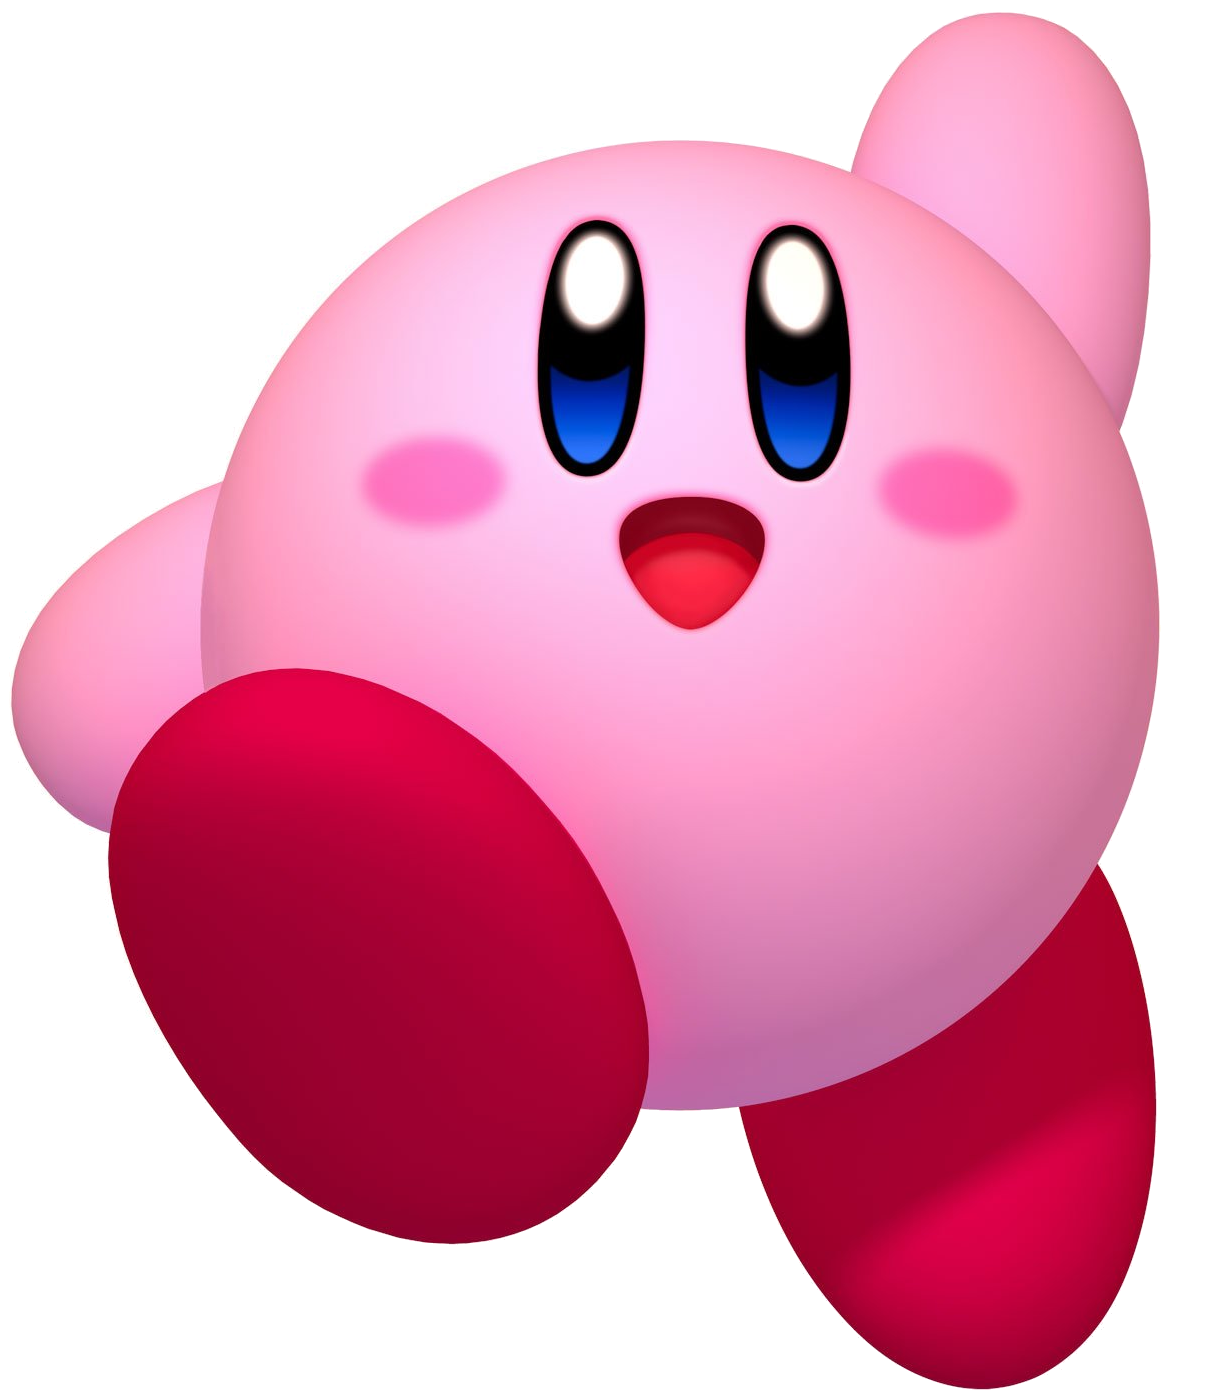 KSS Kirby 2.png